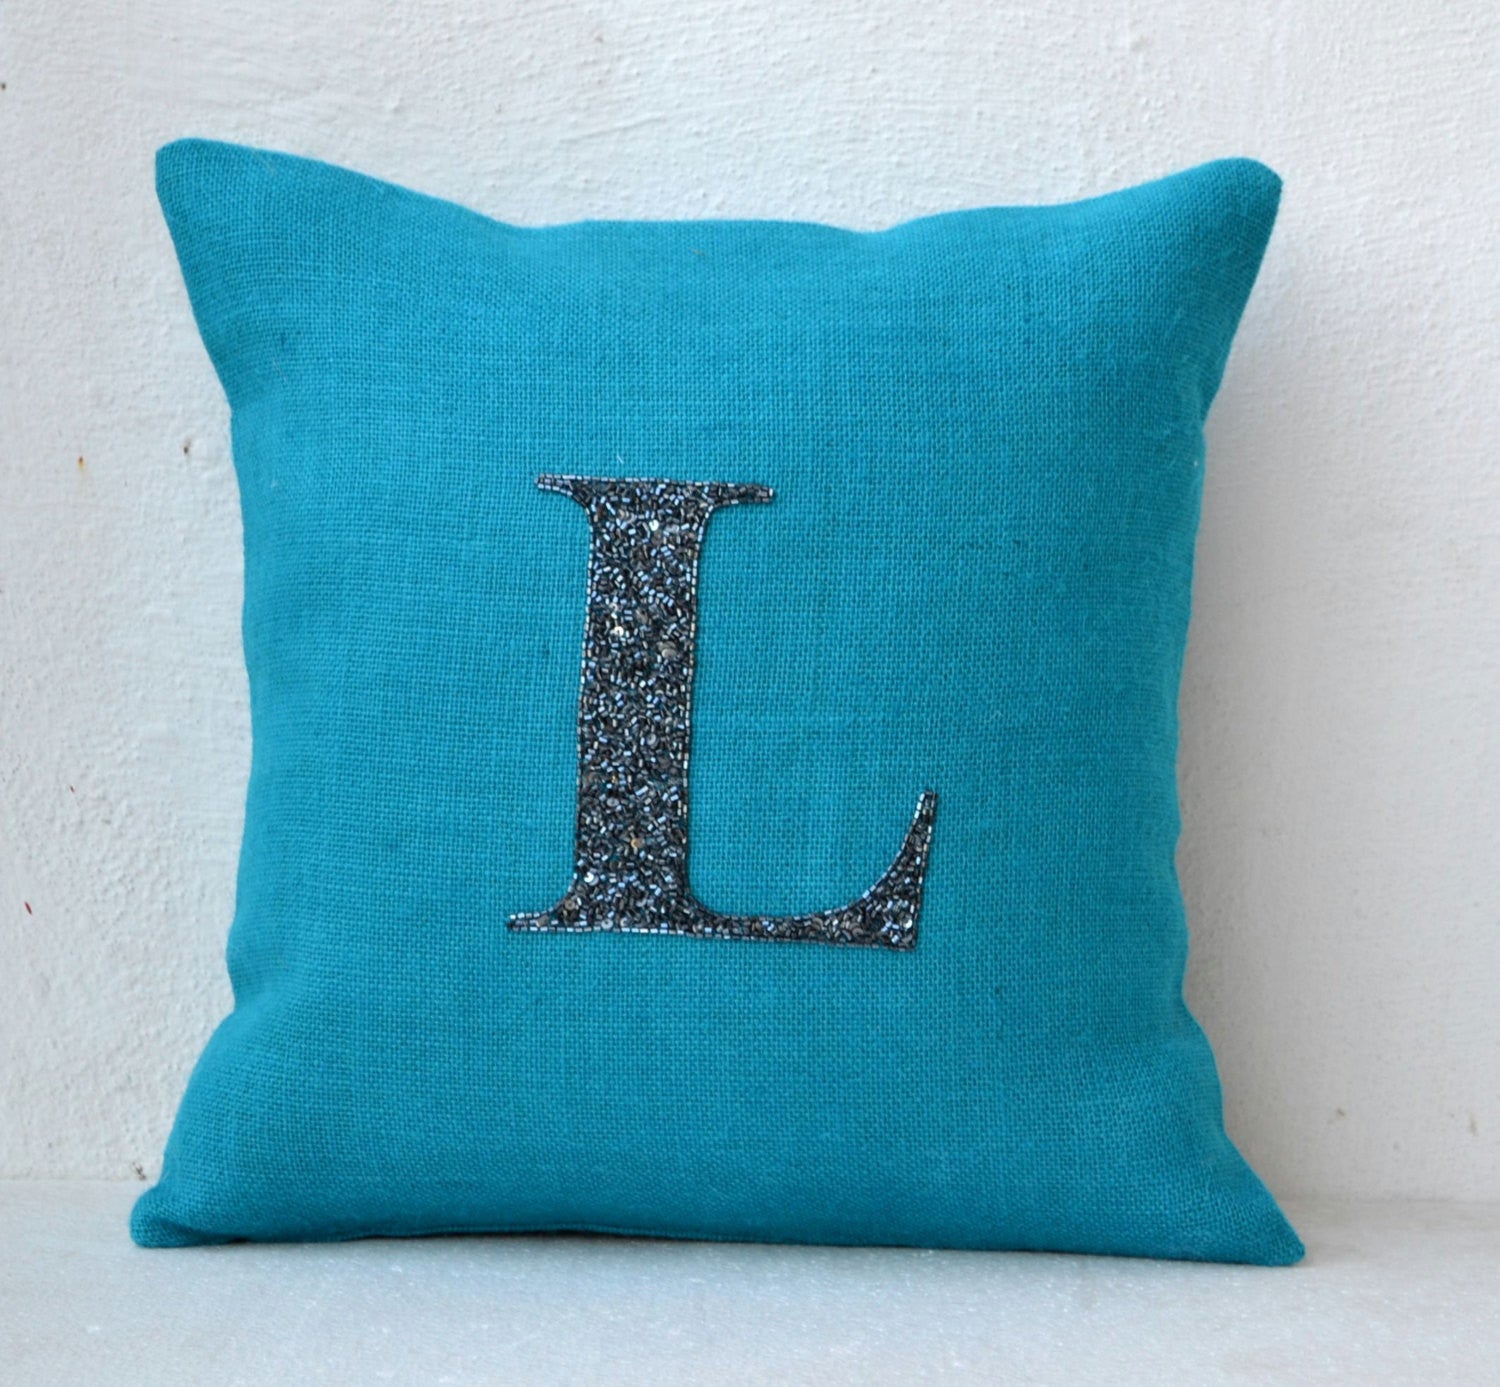 Amore Beaute Customized monogram in black beads and sequin on turquoise blue burlap.